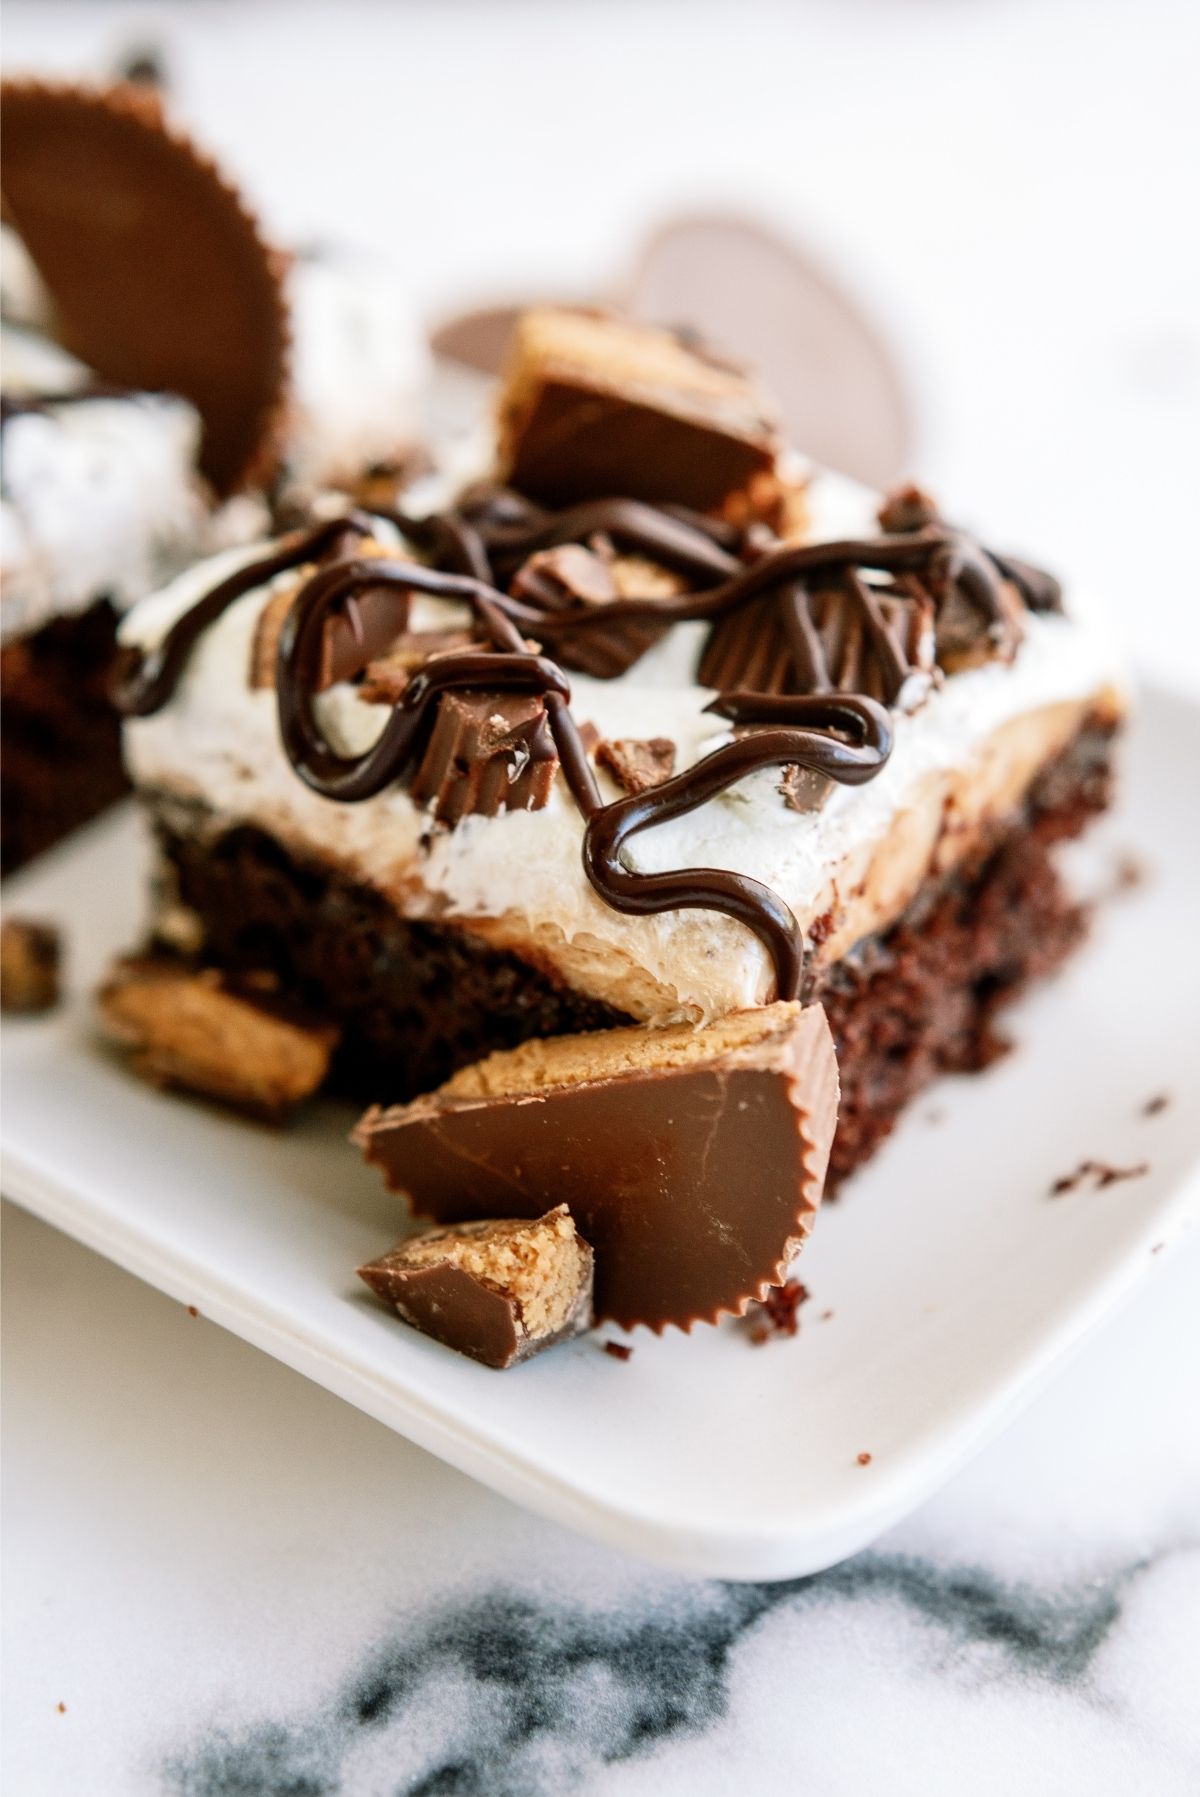 A slice of Reese’s Peanut Butter Poke Cake on a plate
